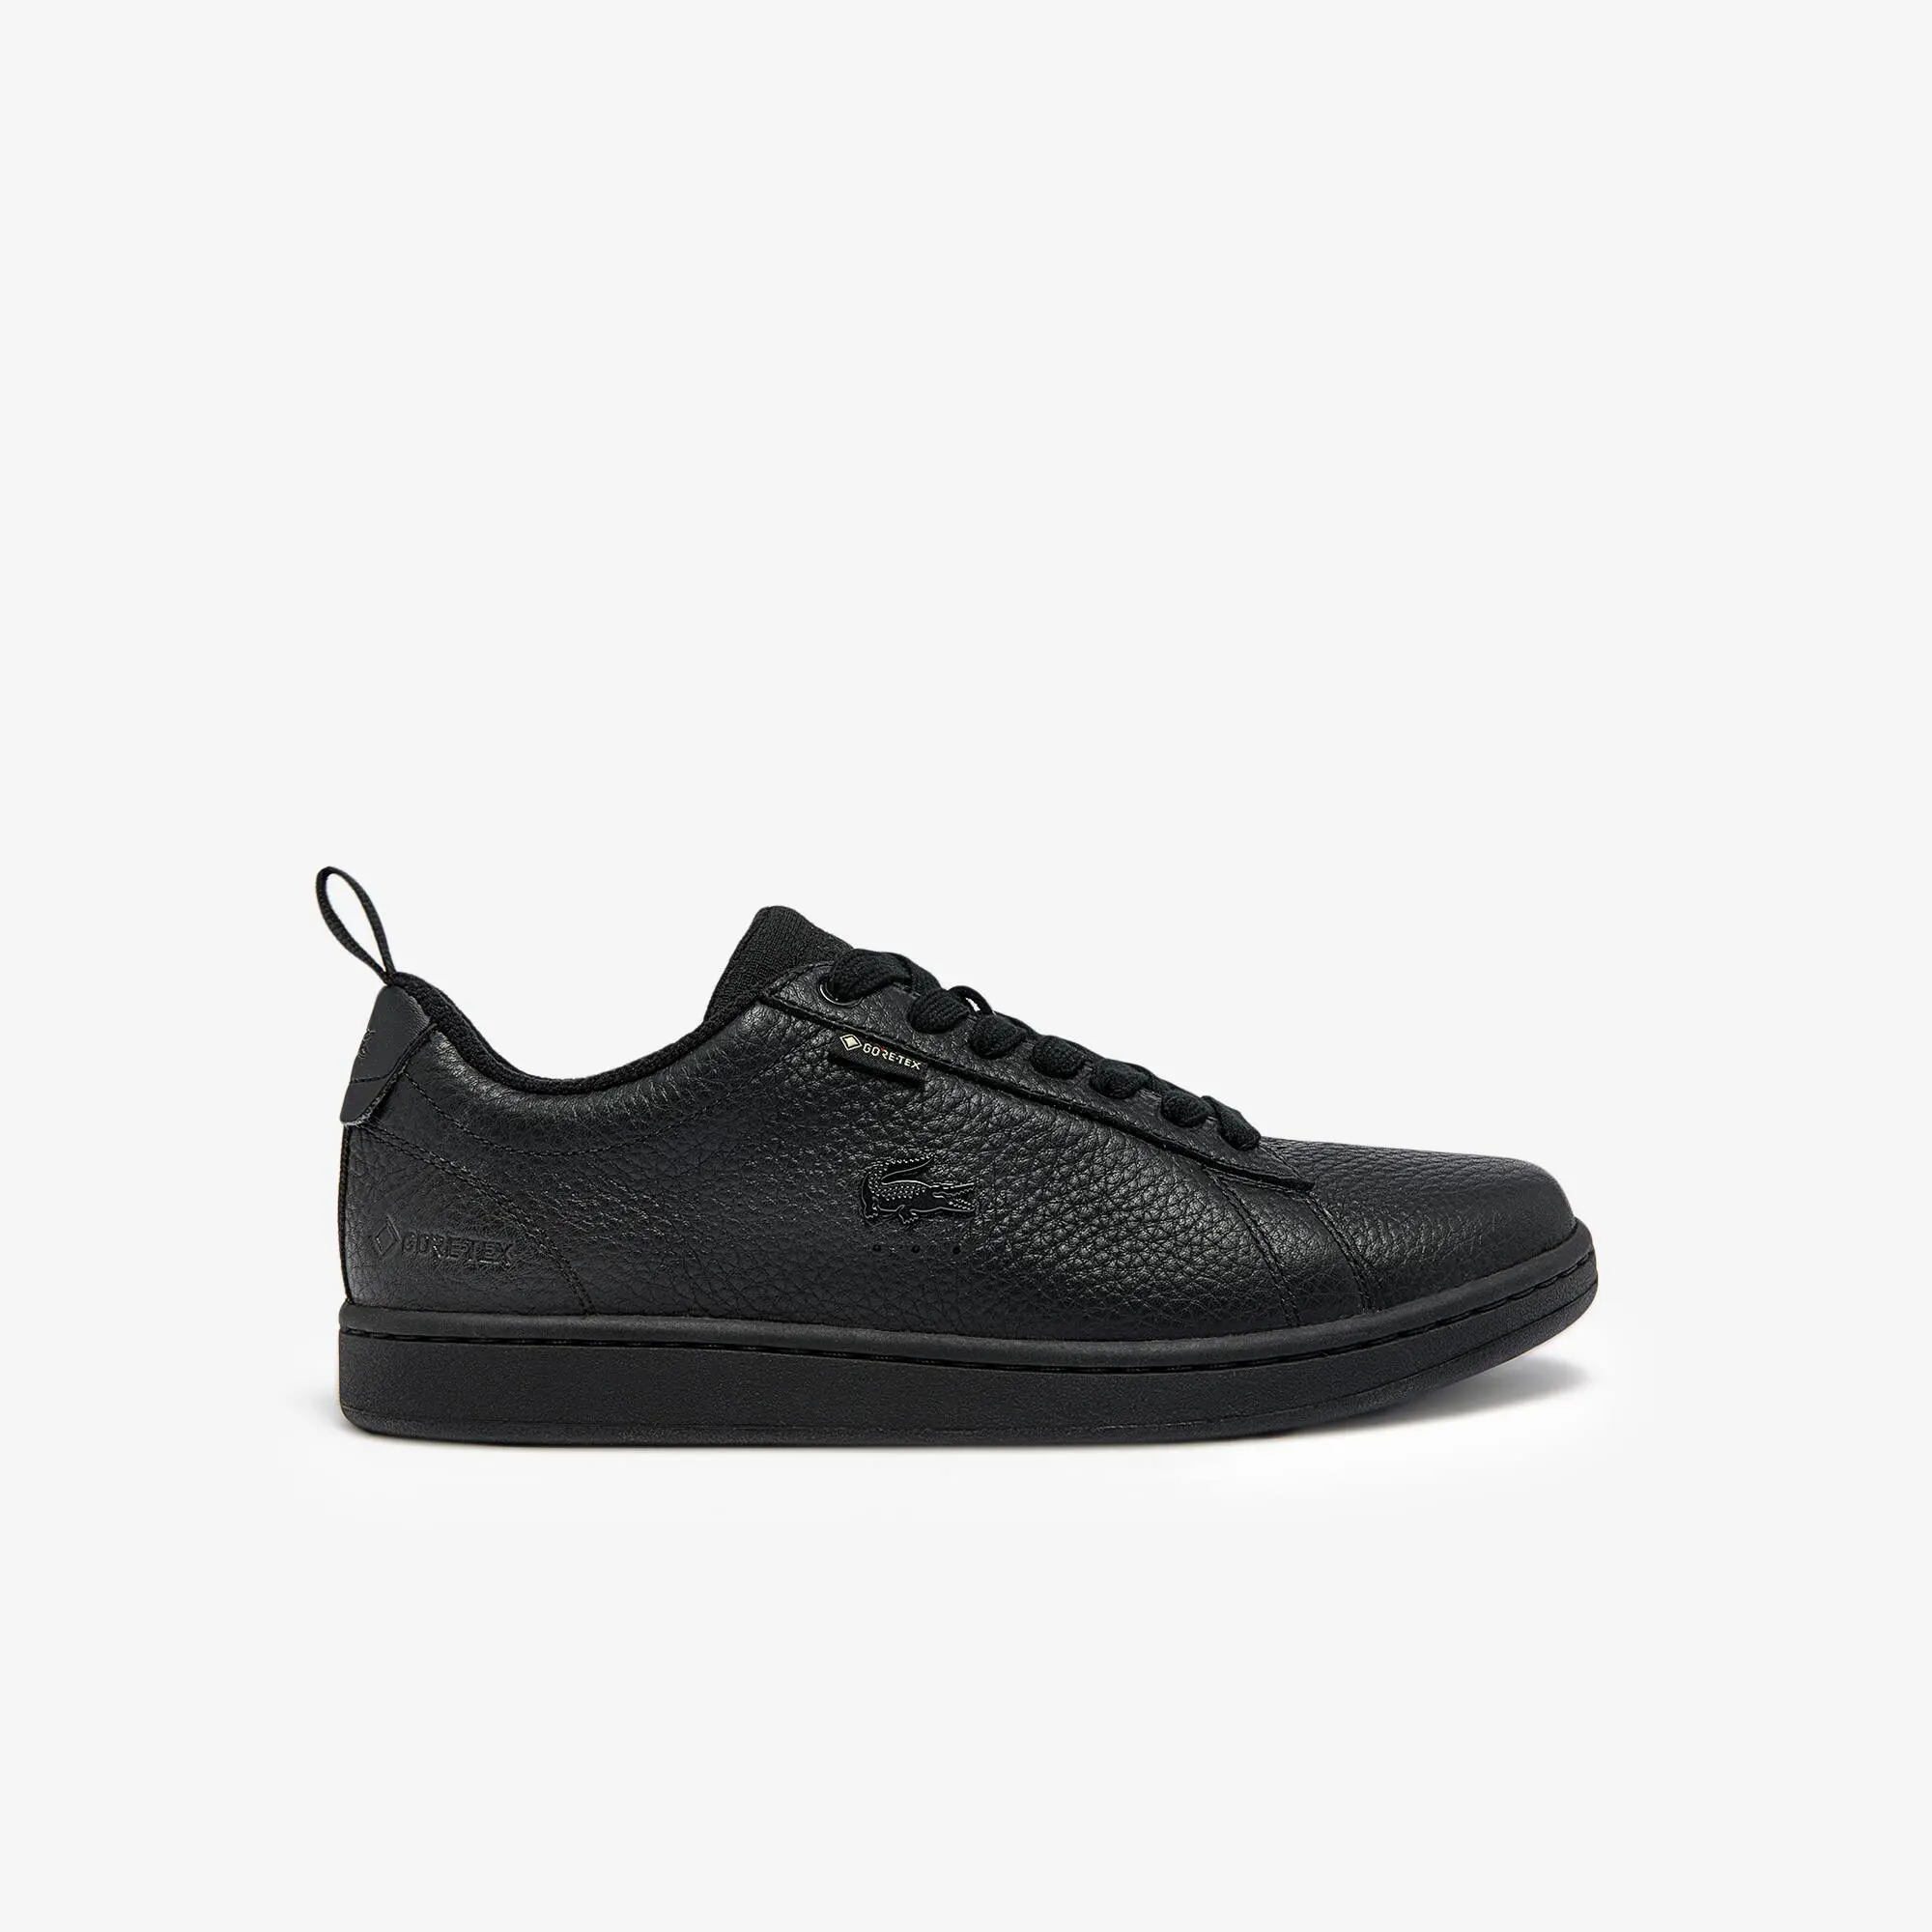 Lacoste Women's Carnaby GTX Leather Trainers. 1